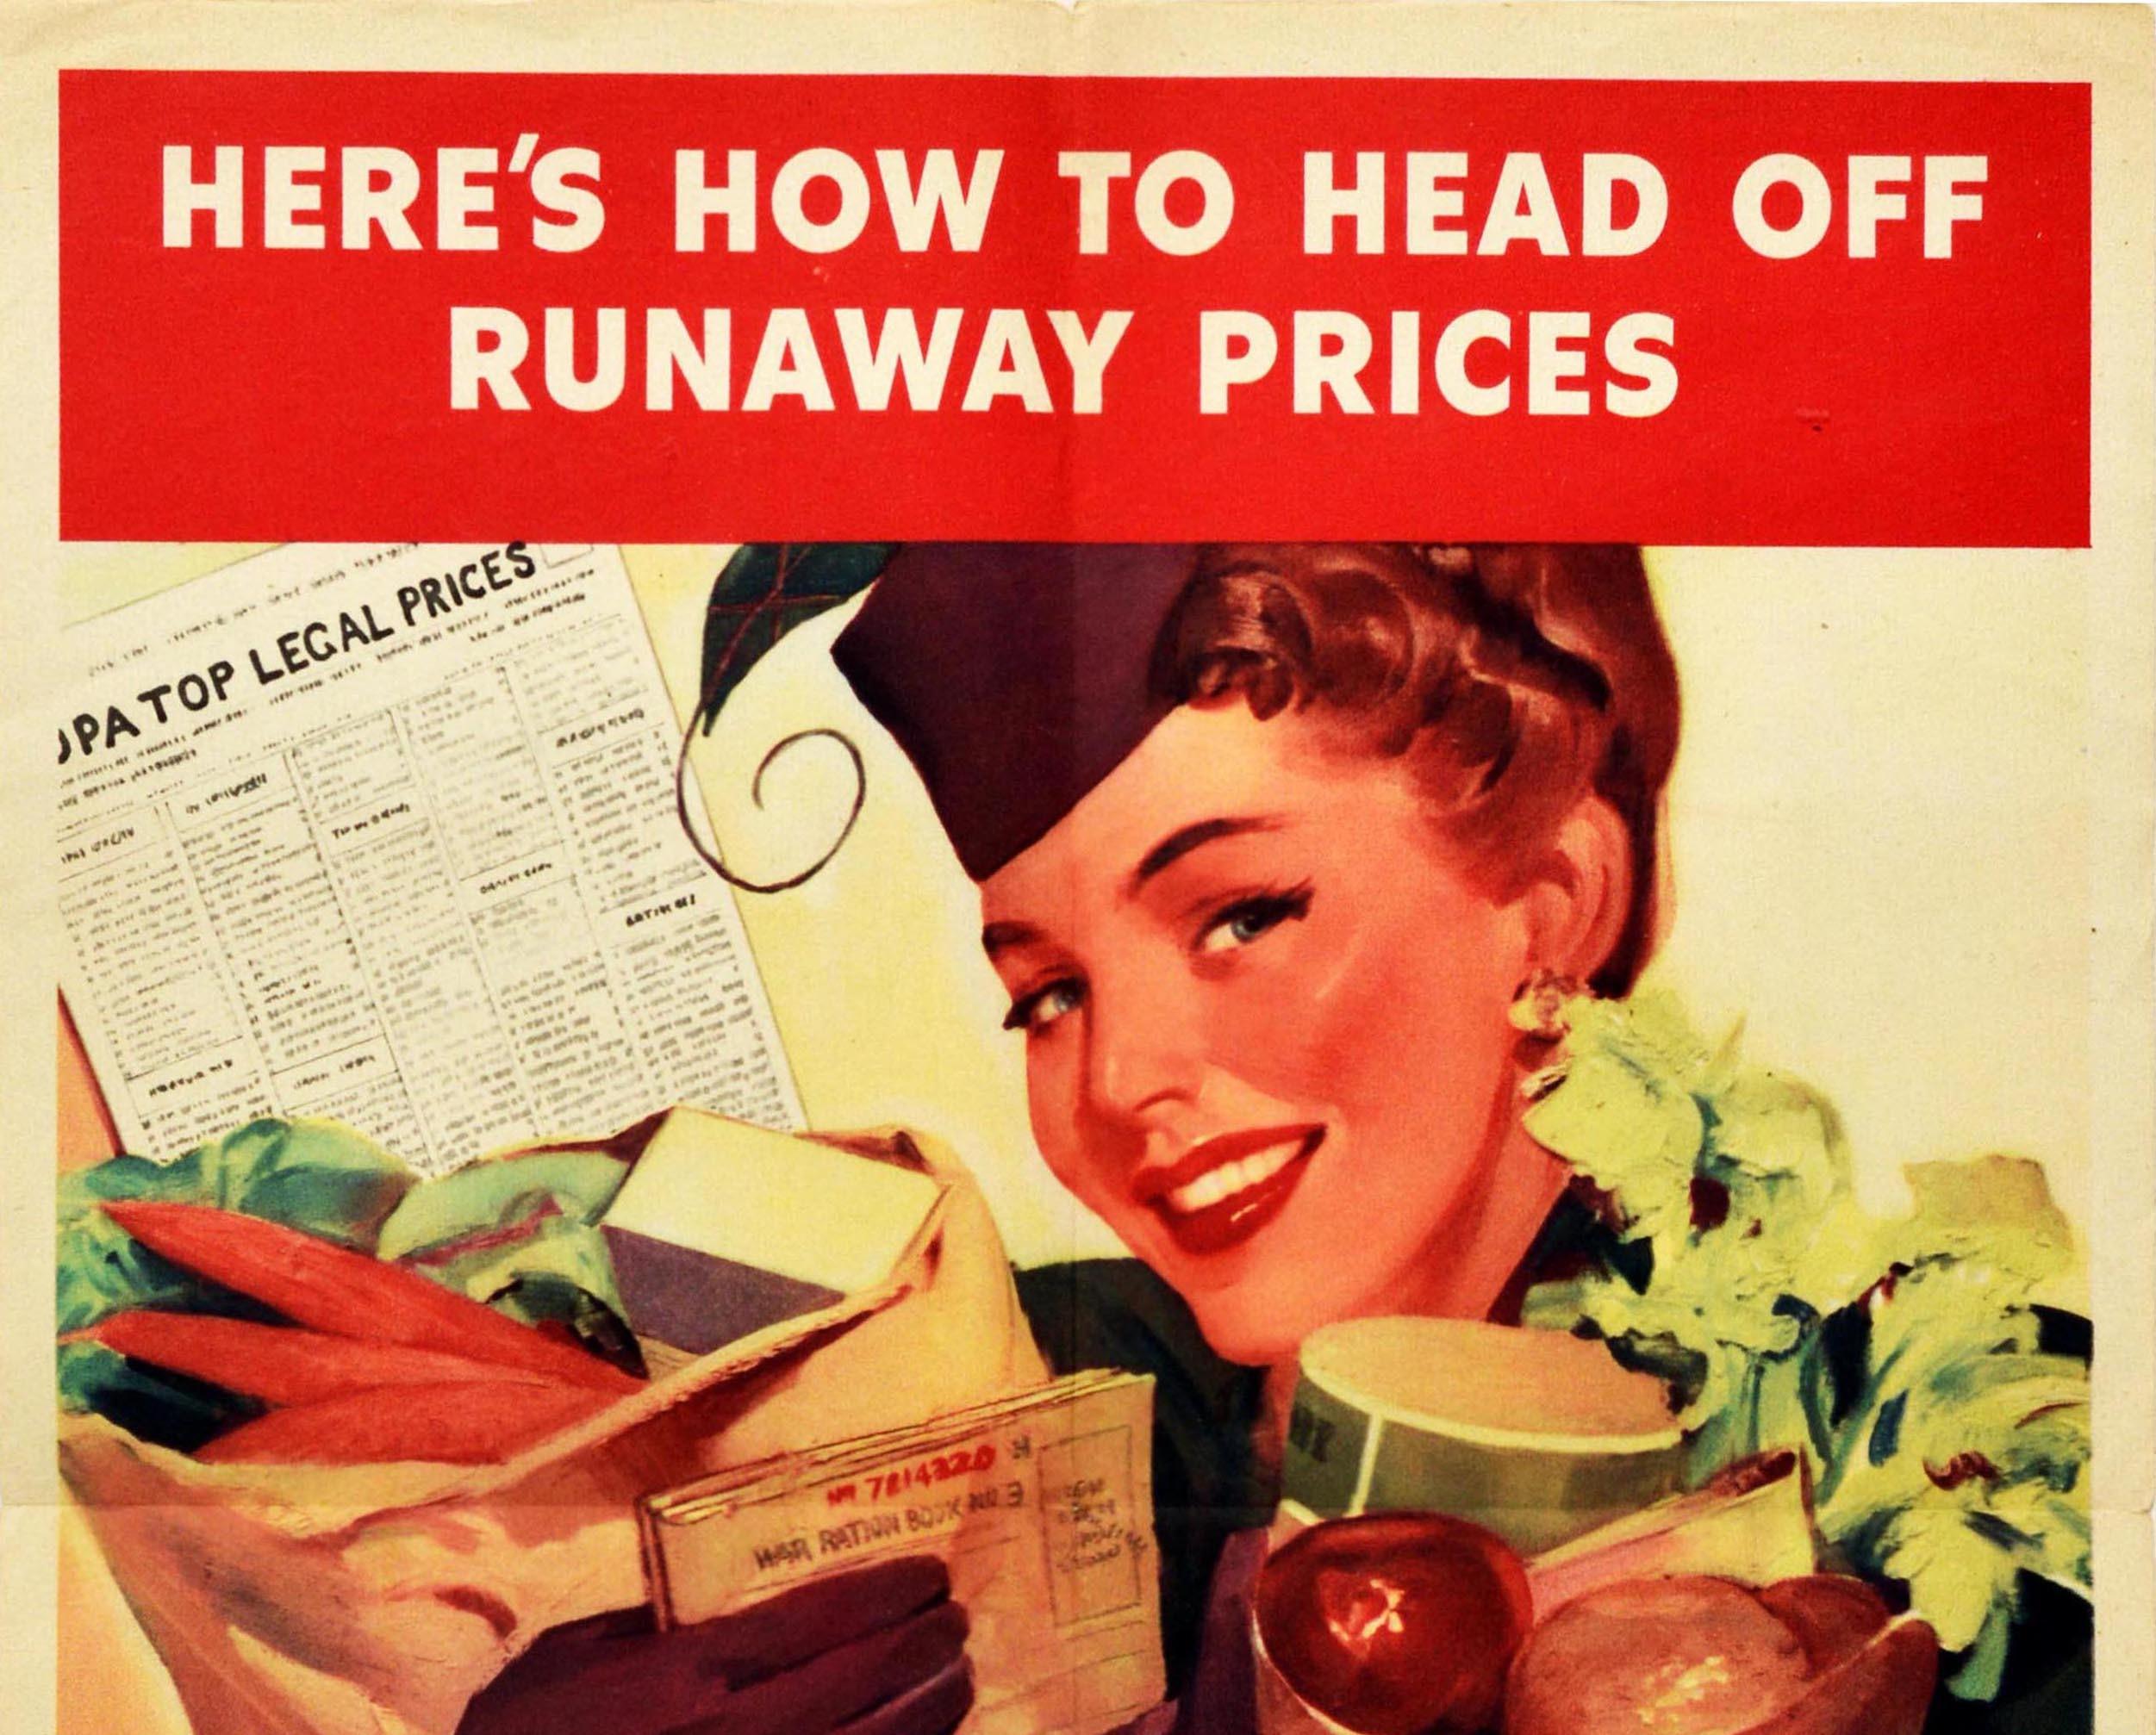 Original Vintage WWII Poster Rationing Runaway Prices USA Victory Economy Plan - Print by Unknown